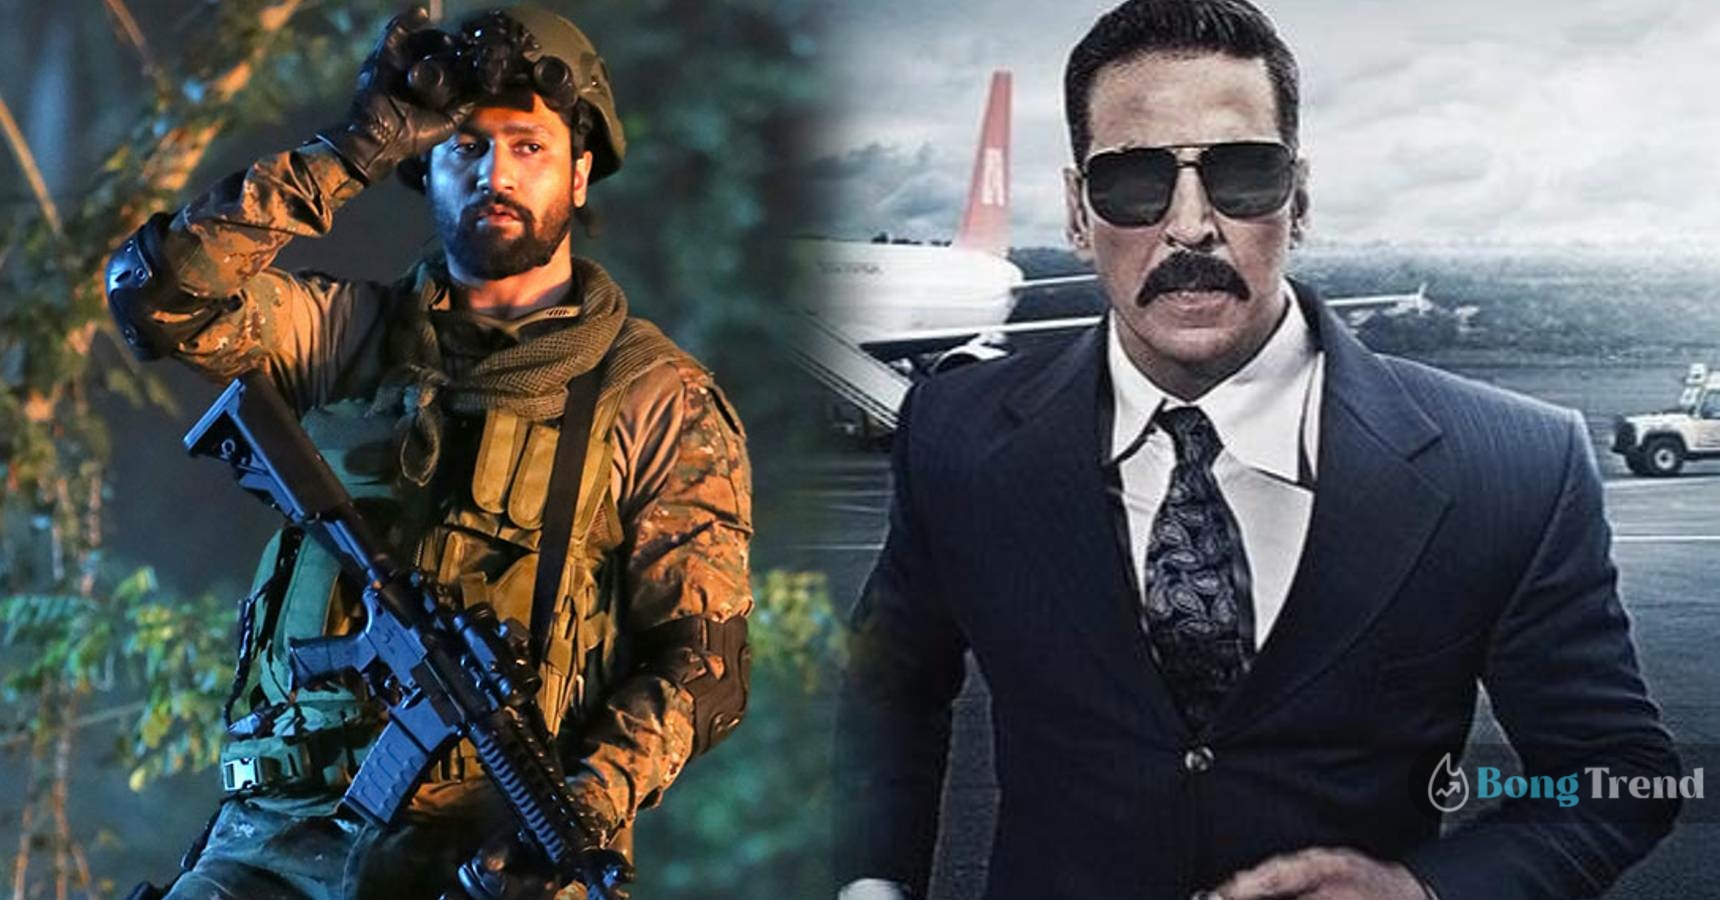 Bollywood movies inspired by real life events